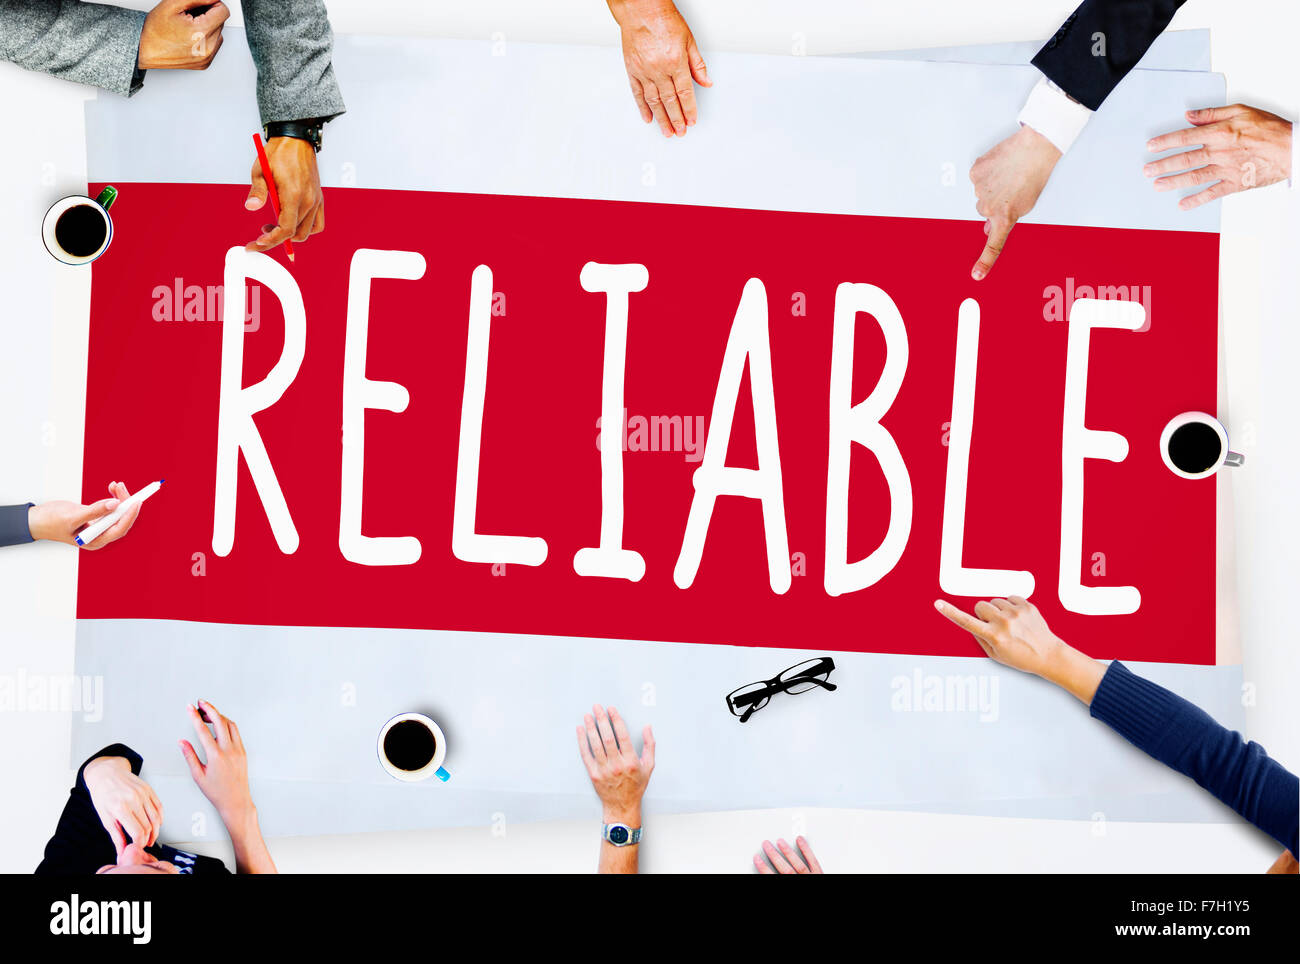 Reliable Honesty Loyalty Integrity Respect Concept Stock Photo